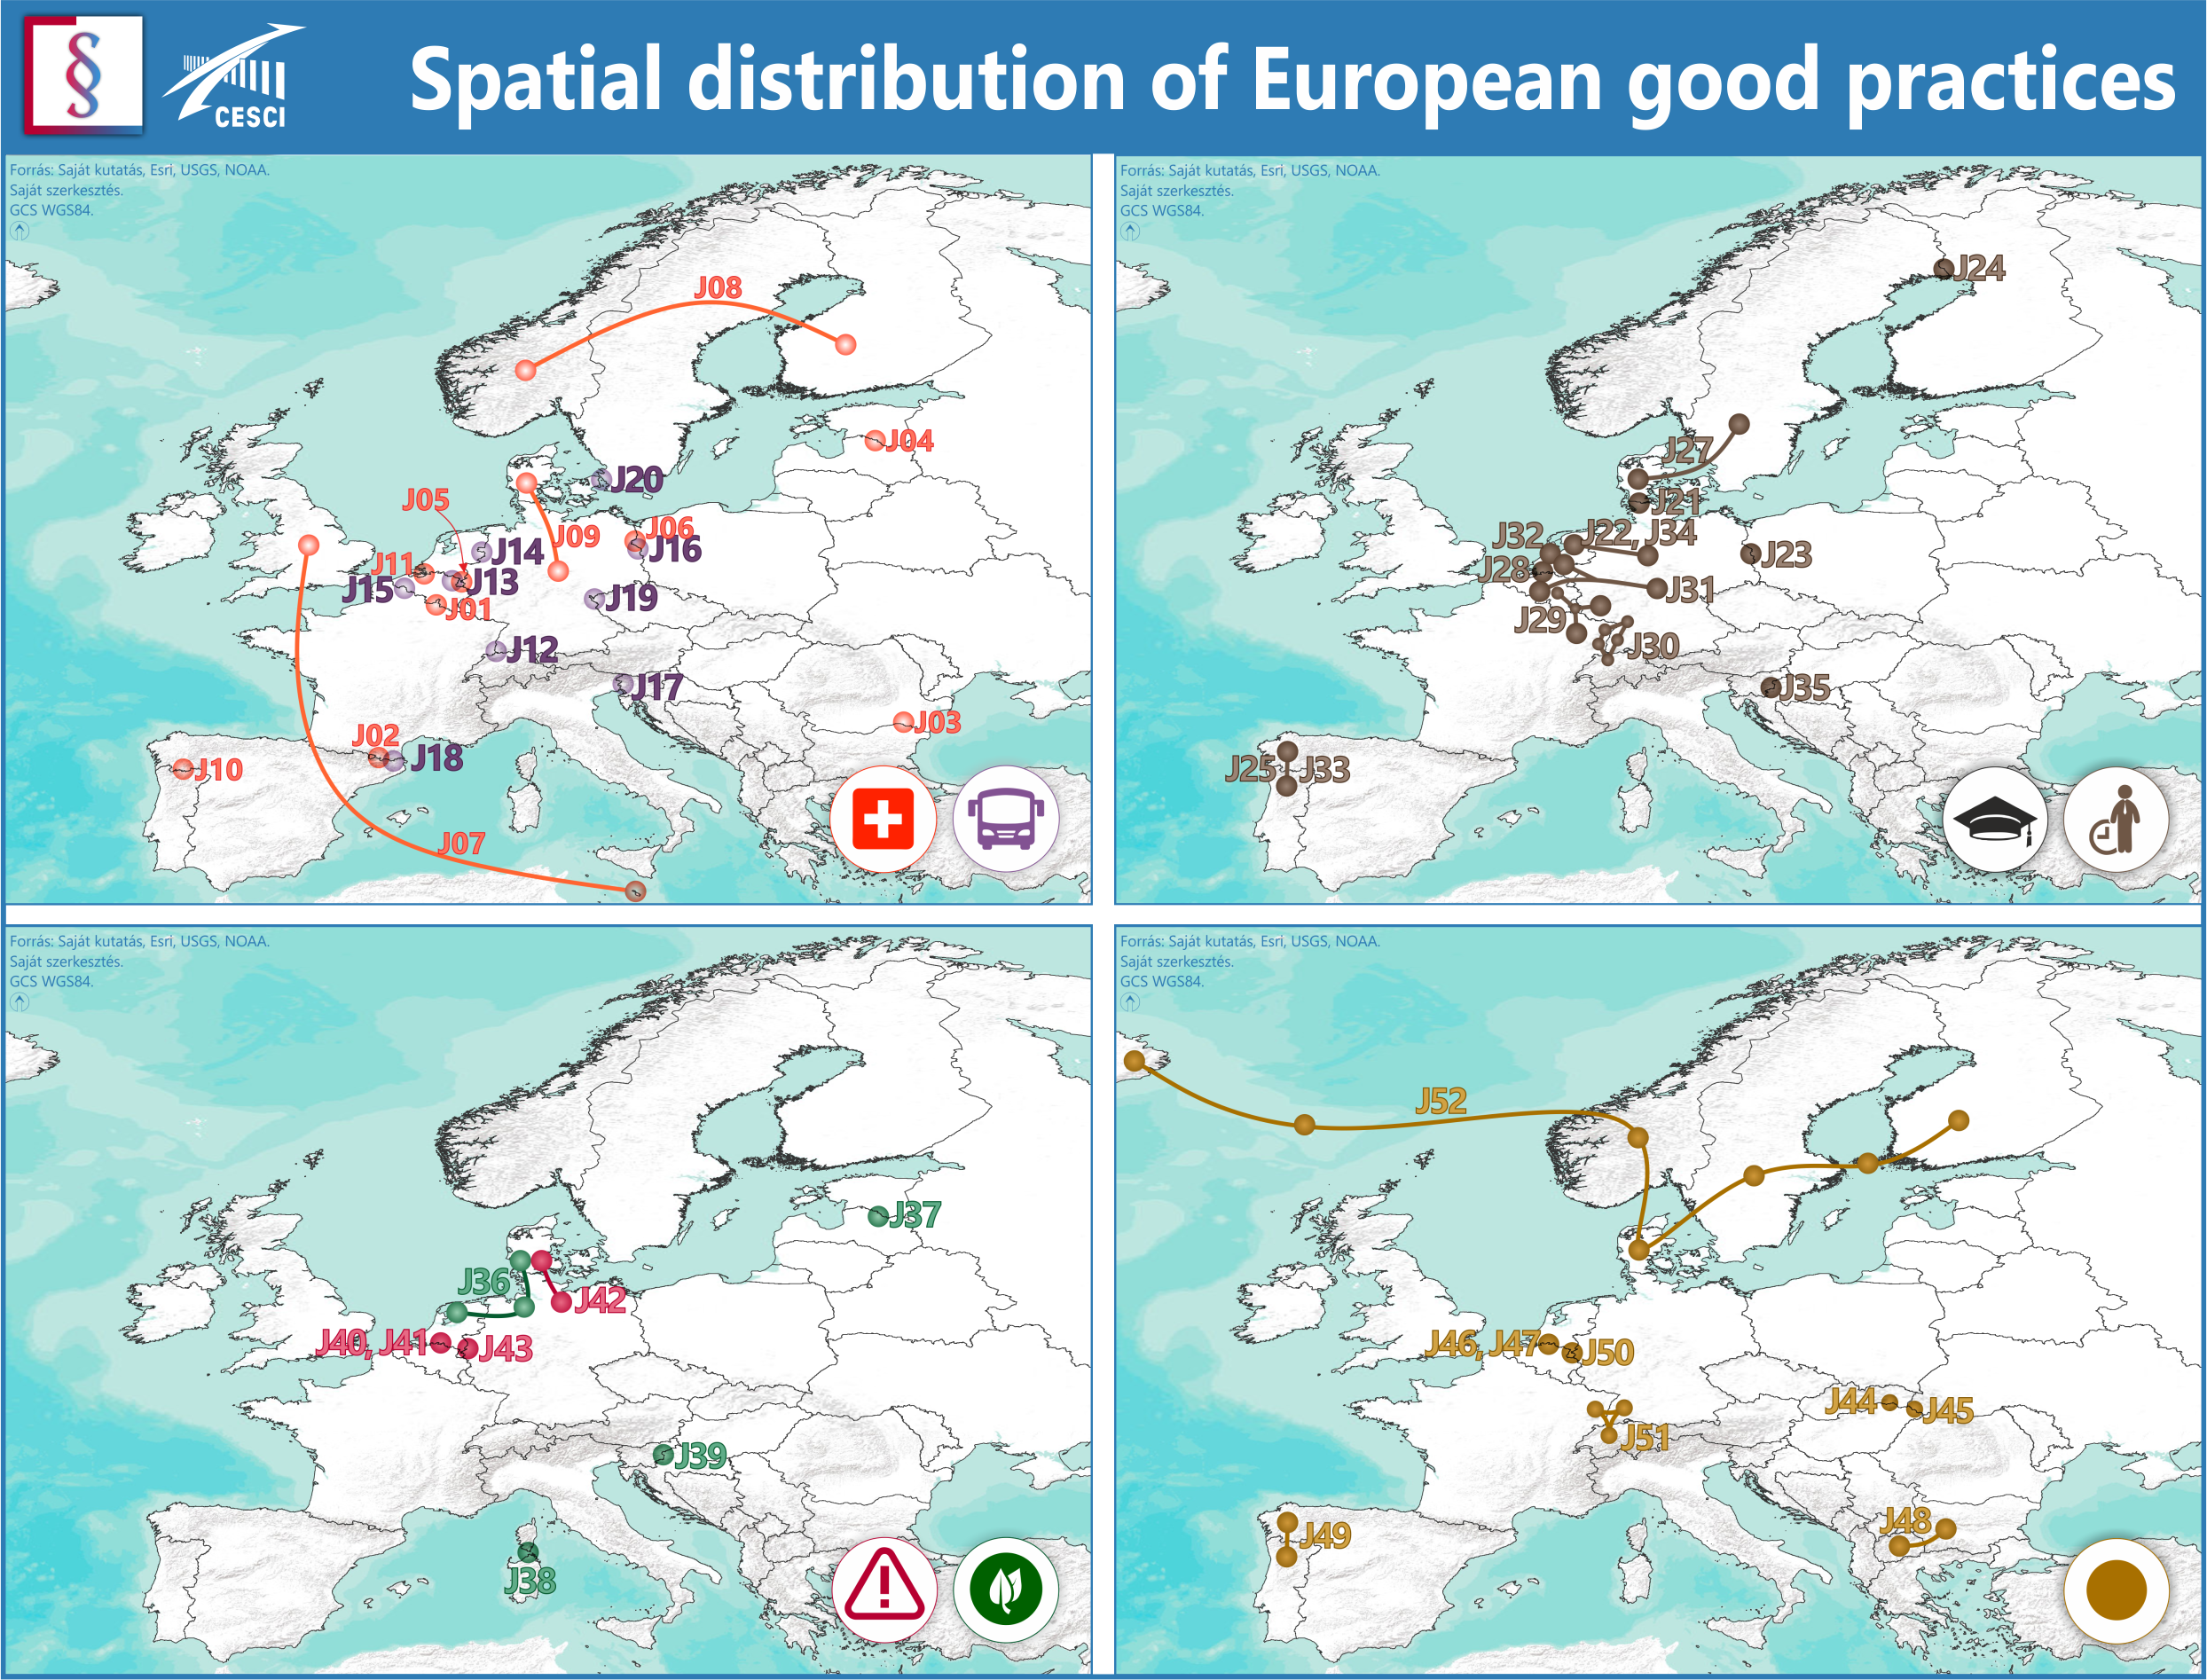 Spatial distribution of European good practices